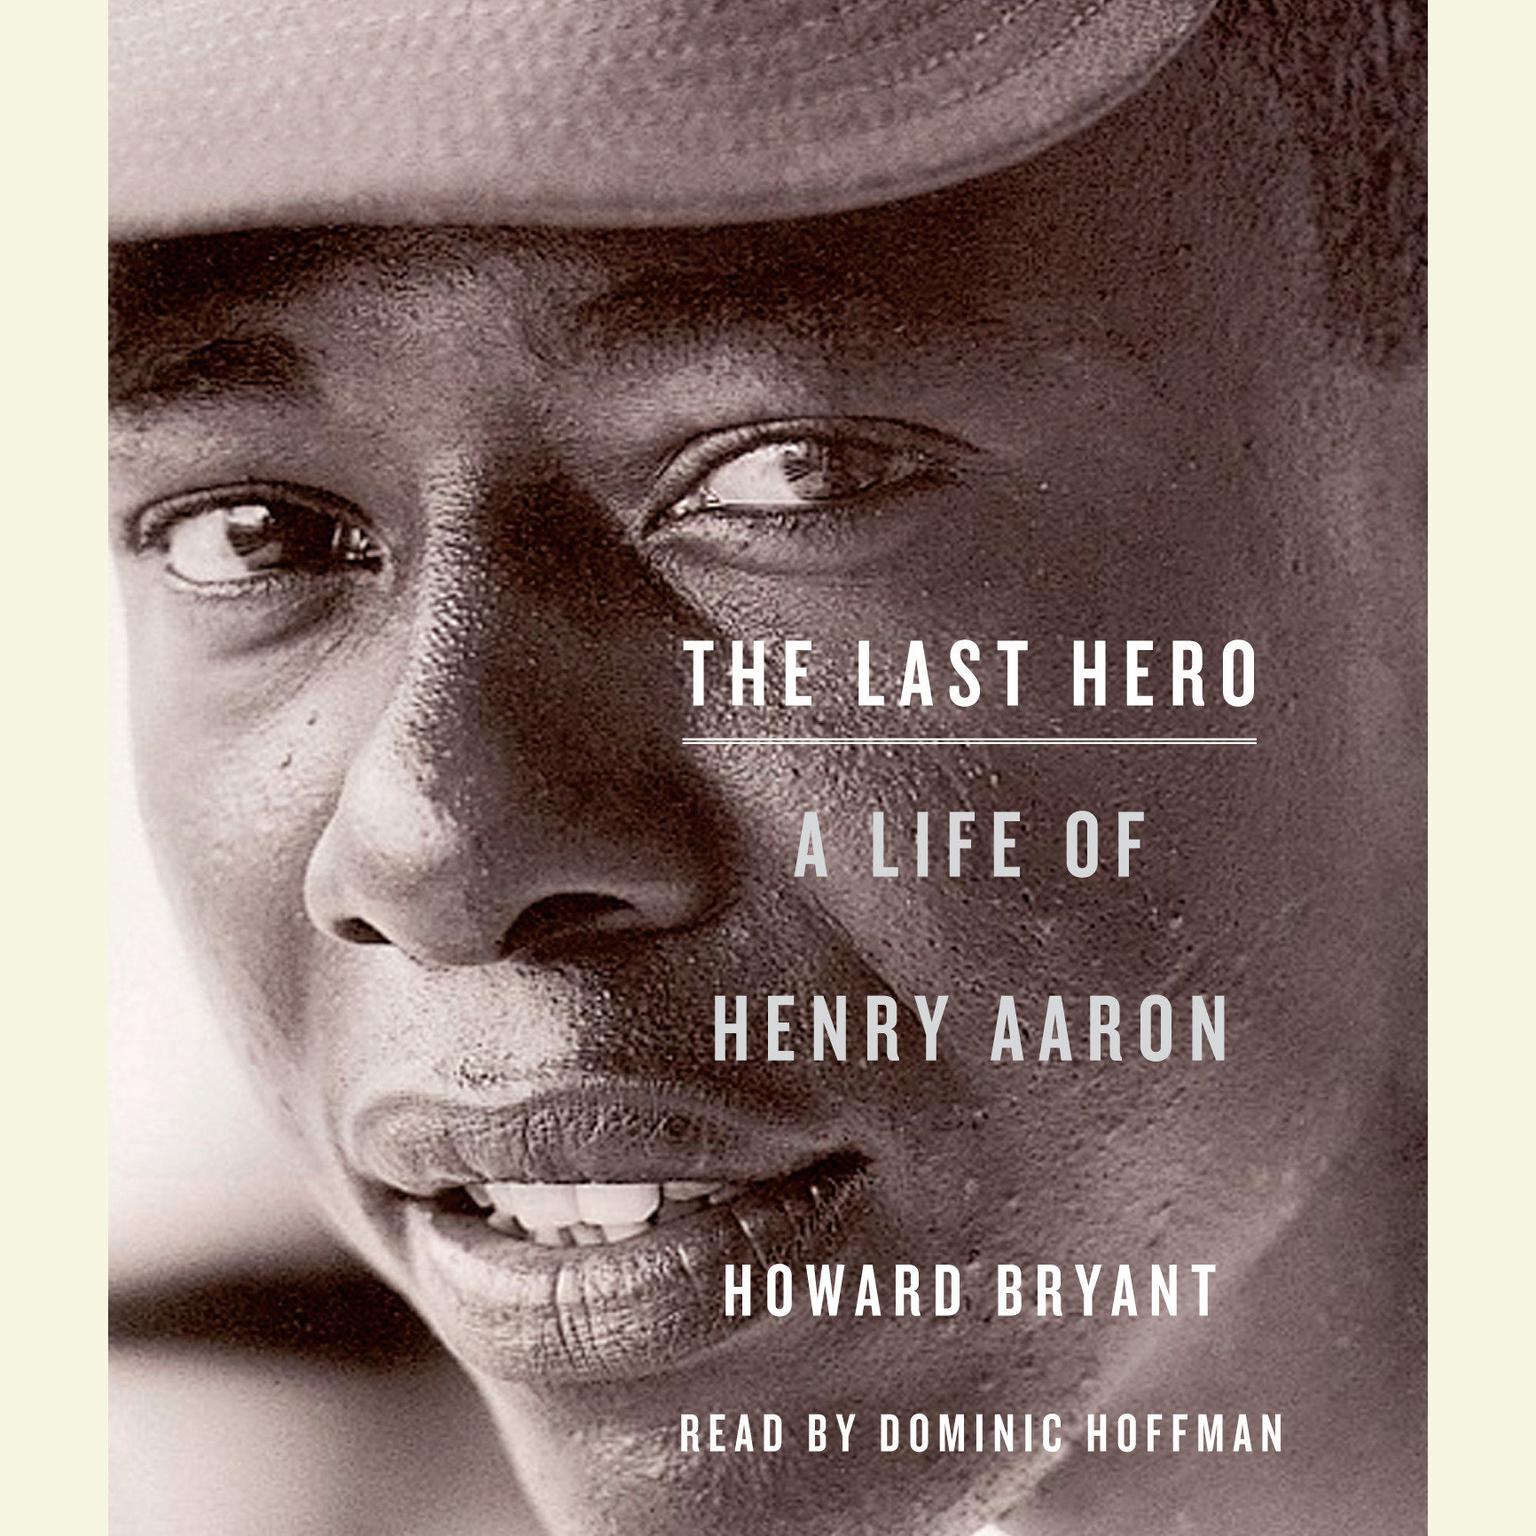 The Last Hero (Abridged): A Life of Henry Aaron Audiobook, by Howard Bryant